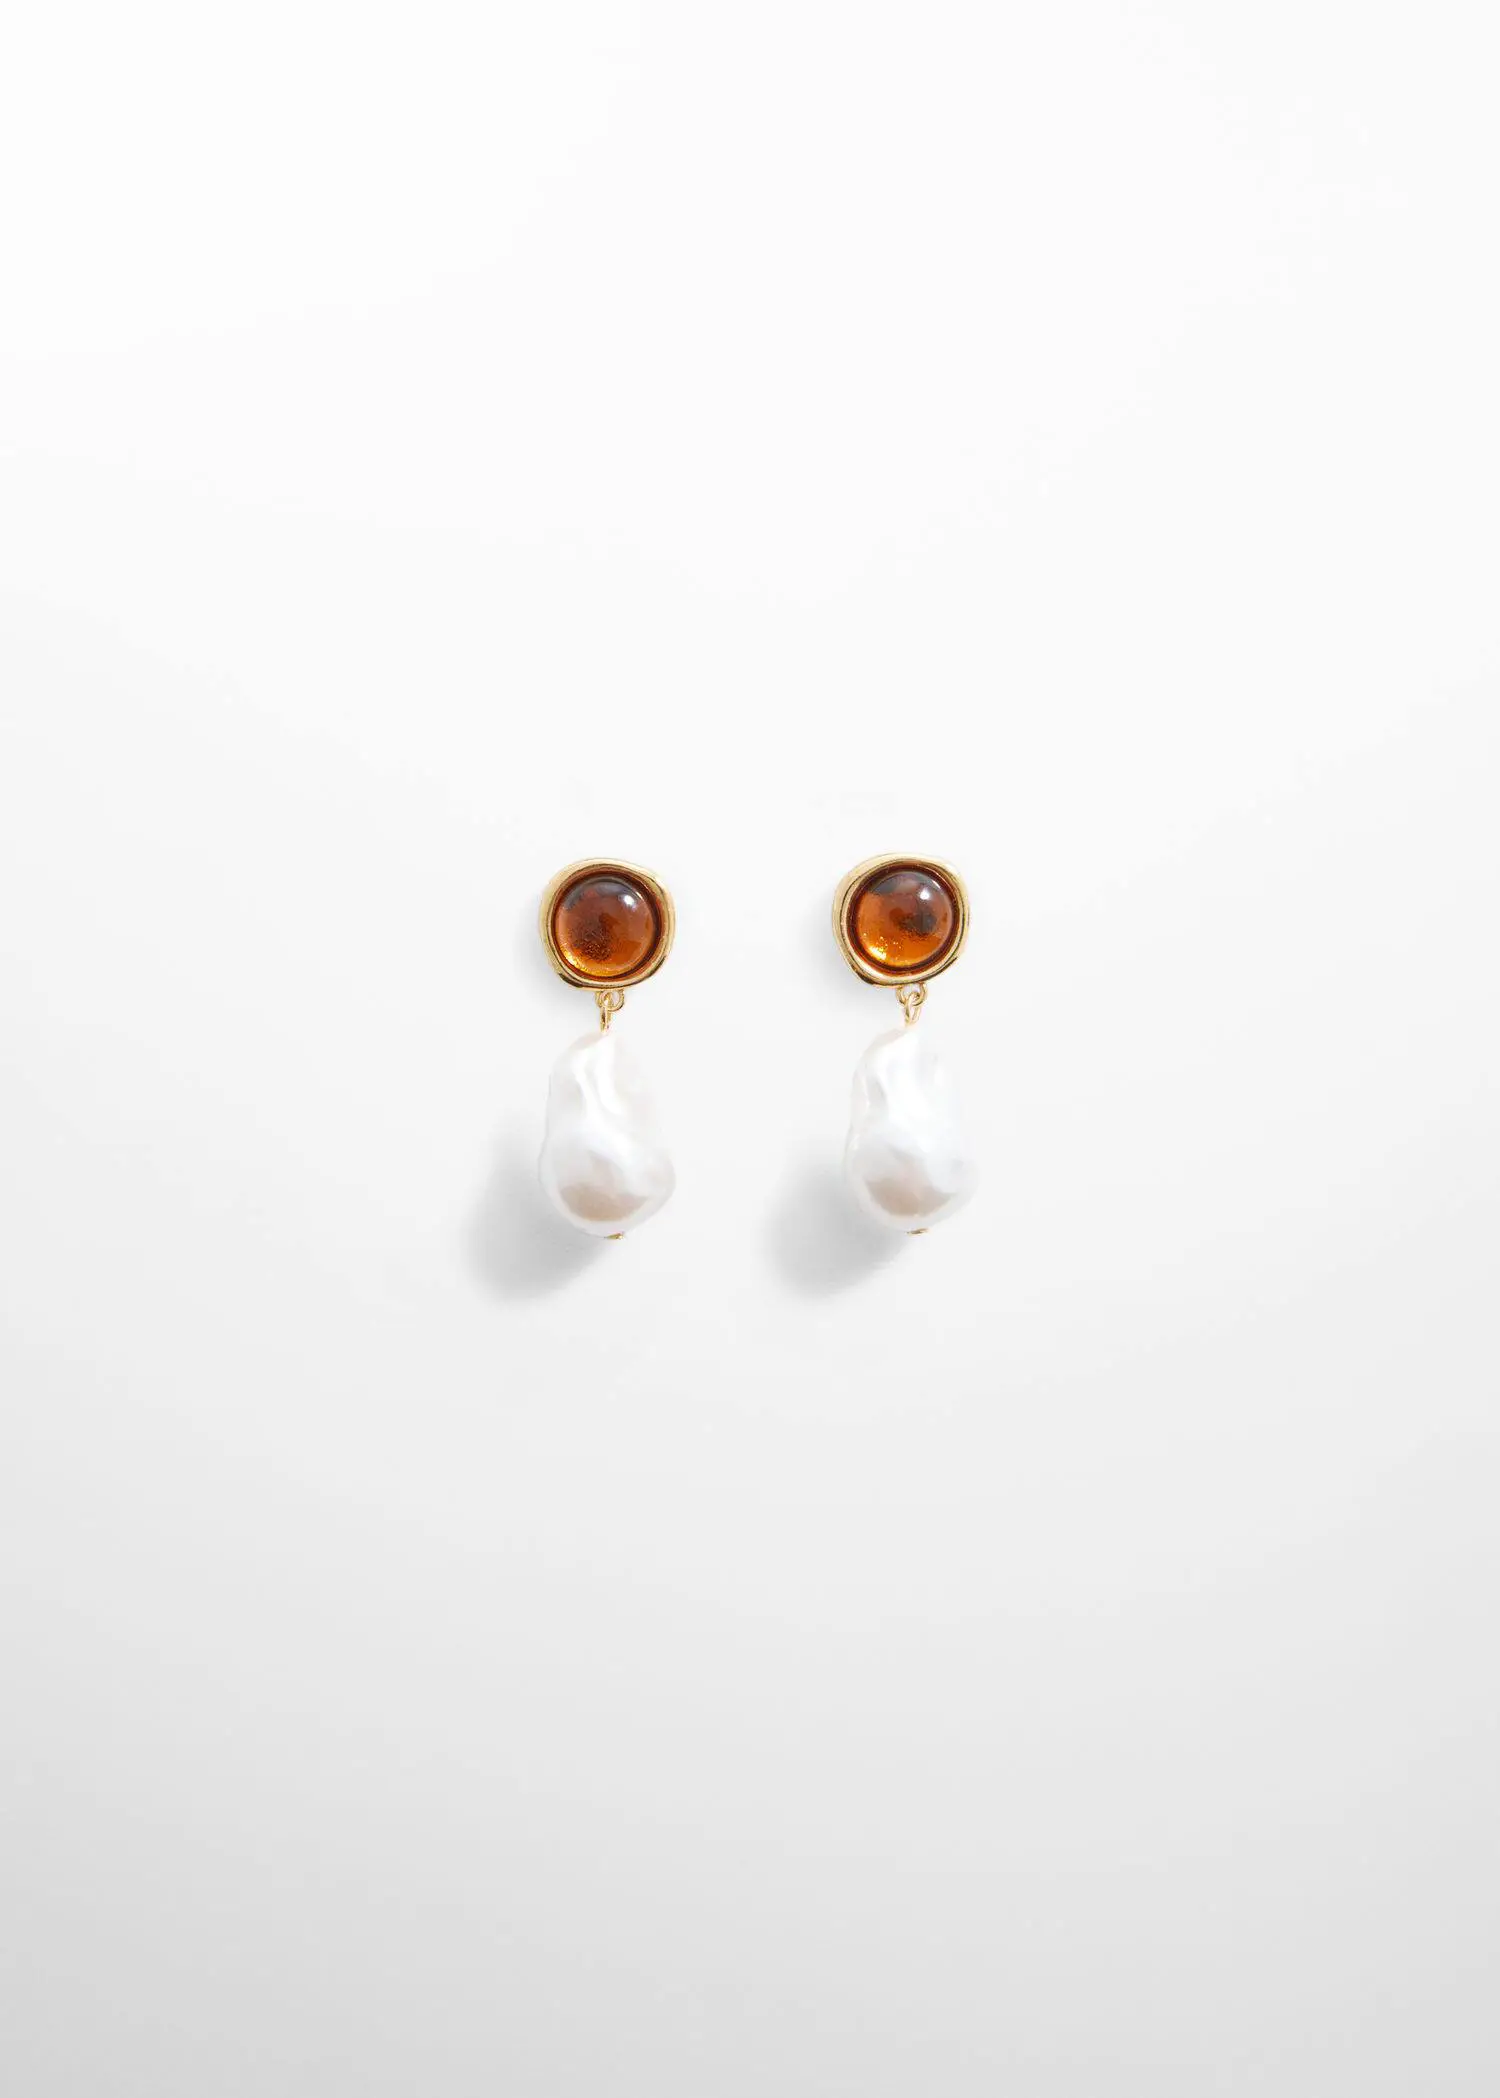 Mango Combined stones earrings. a pair of gold earrings with pearls hanging off of them. 